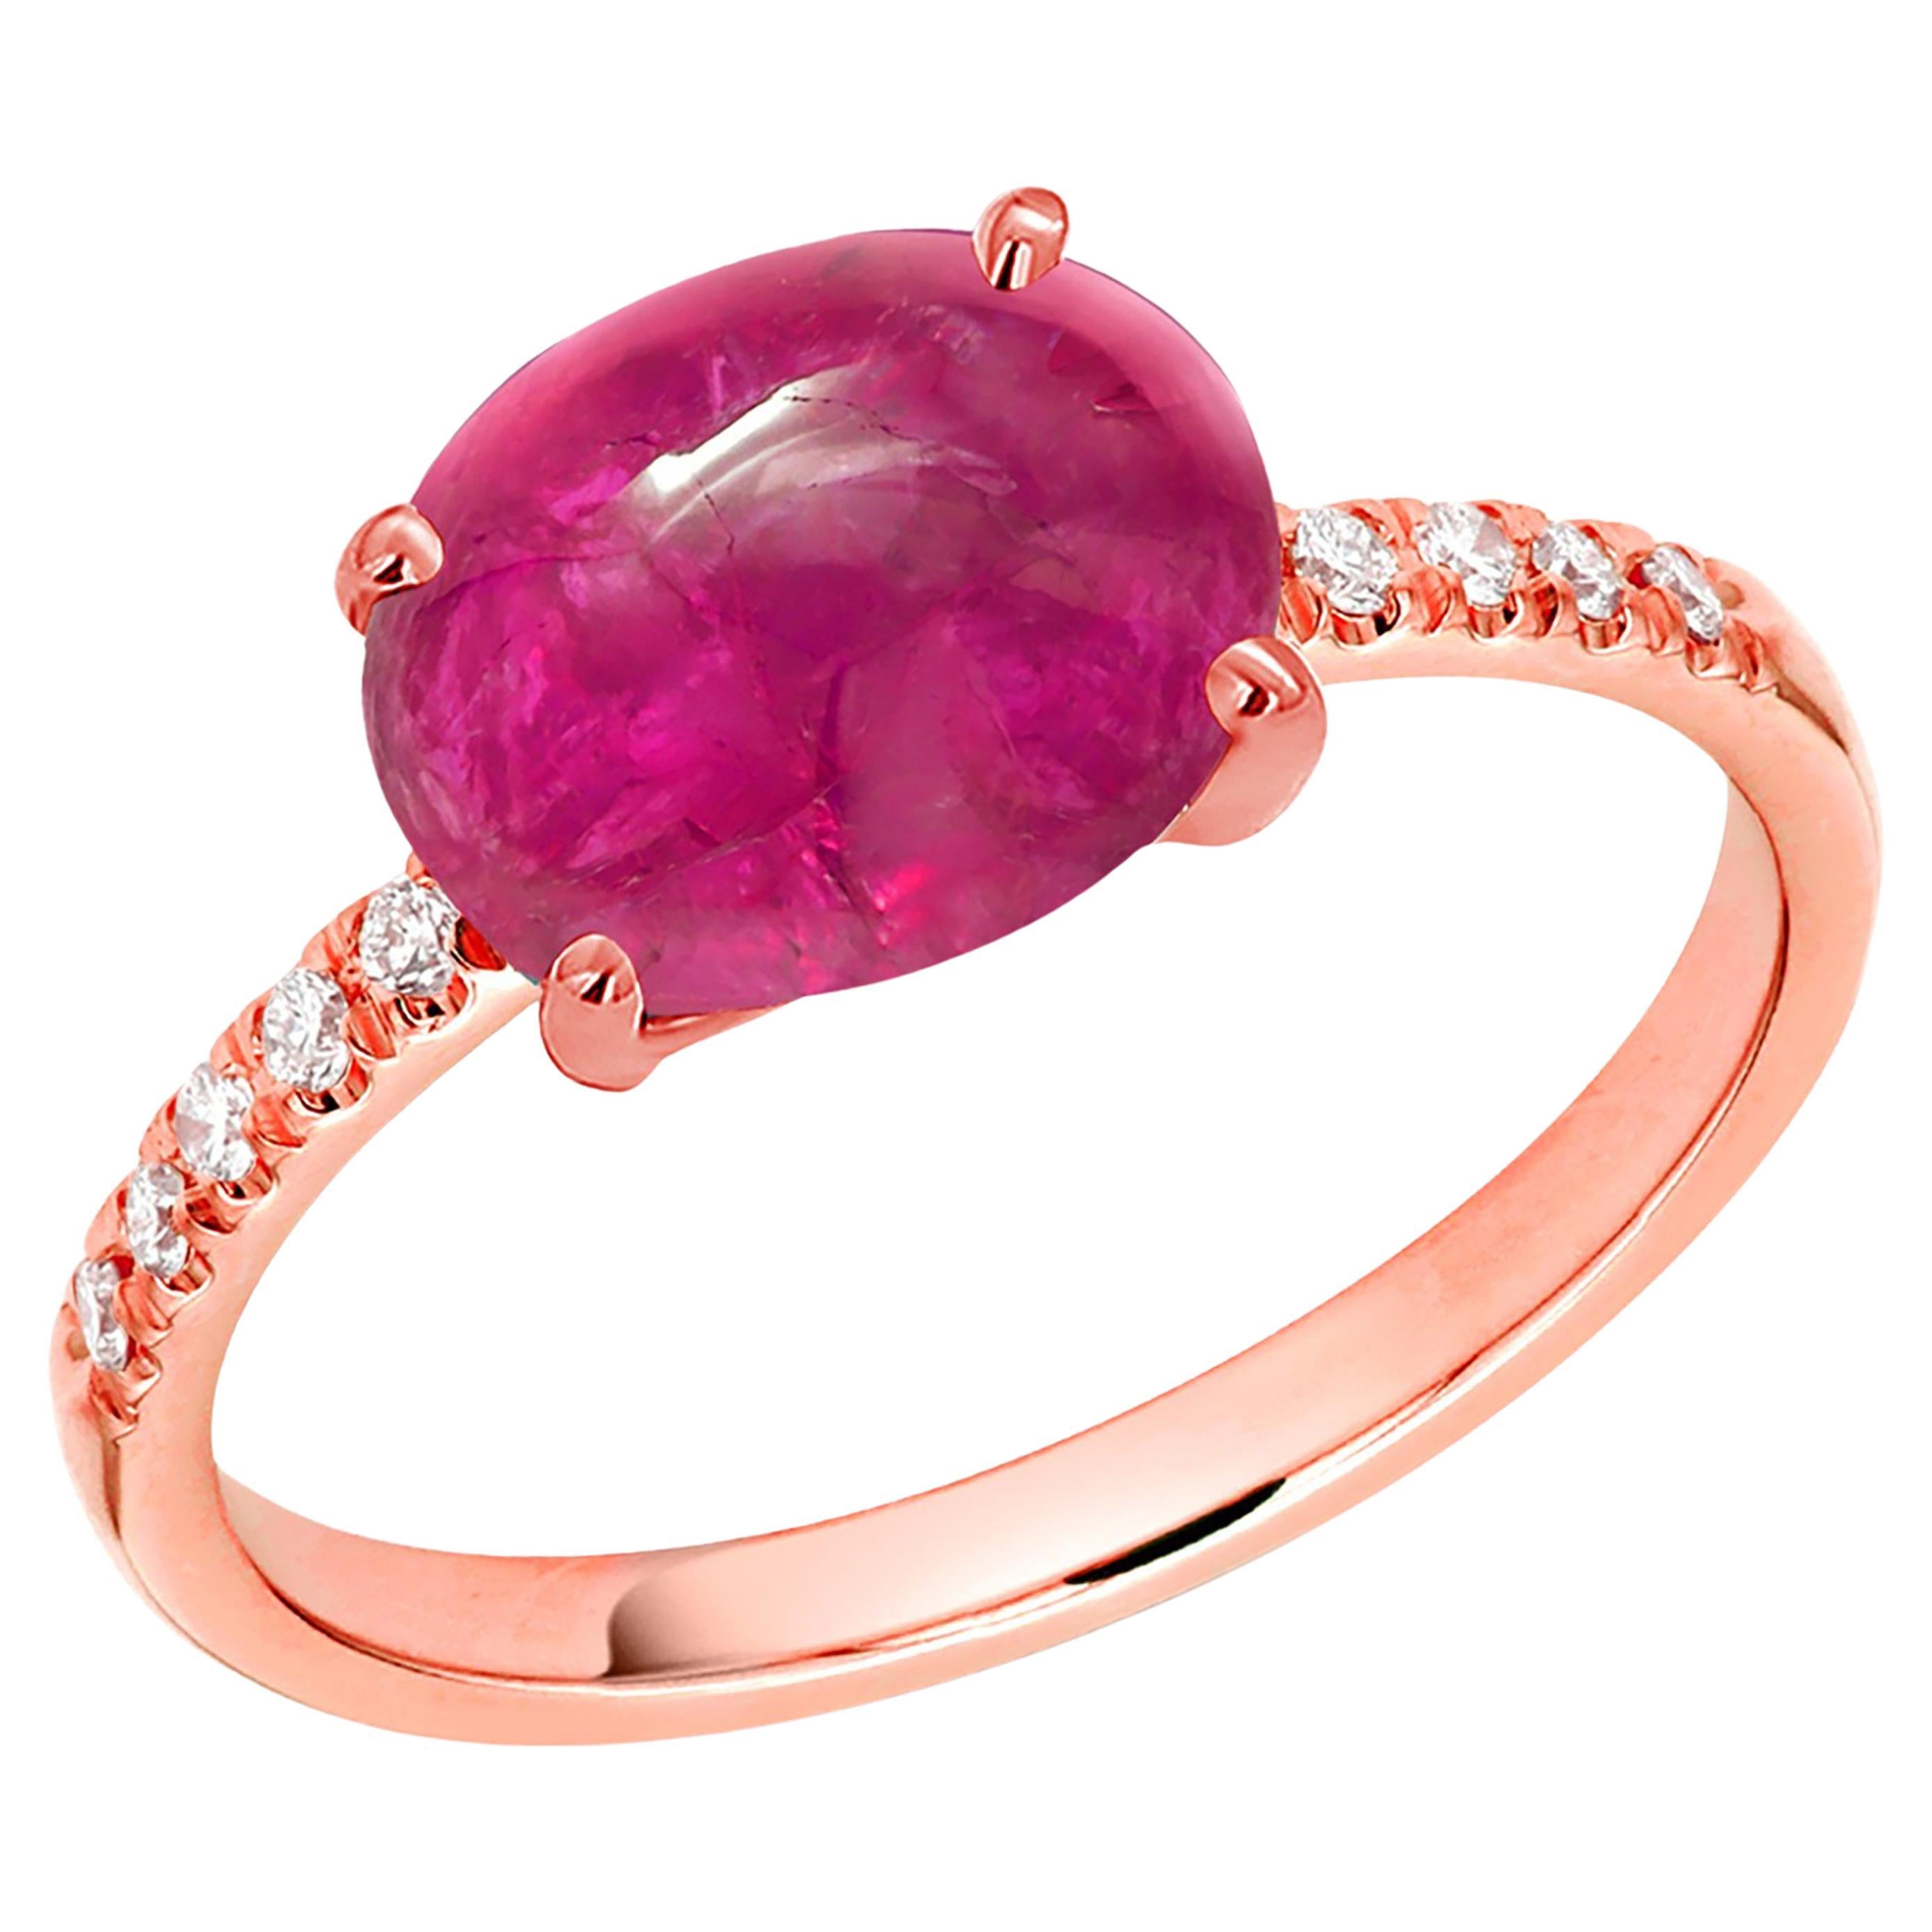 Cabochon Burma Ruby 2.80 Carat Diamond 0.25 Carat Rose Gold Cocktail Ring For Sale